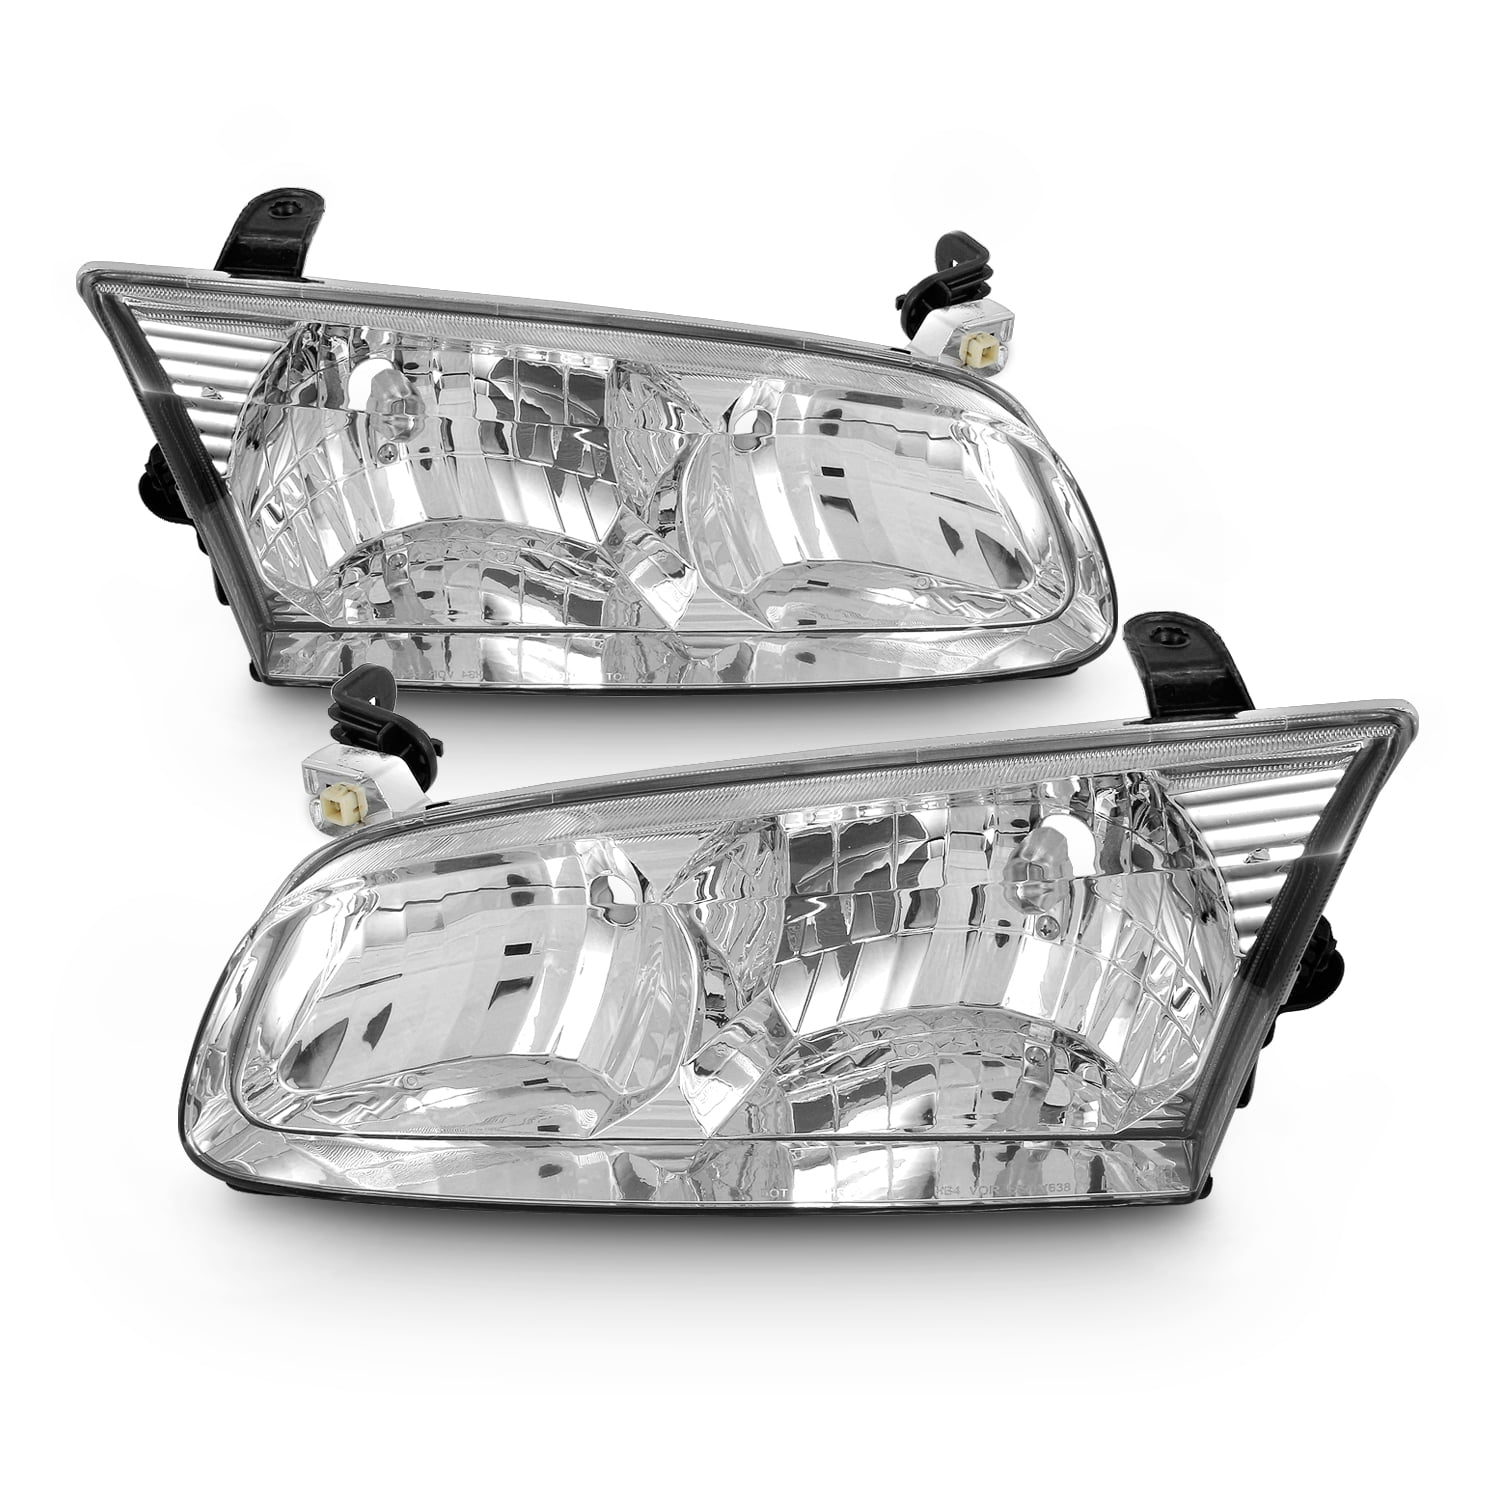 AKKON For 2000 2001 Toyota Camry OE Style Inner Side Only Chrome Housing Headlights Lamp Replacement 